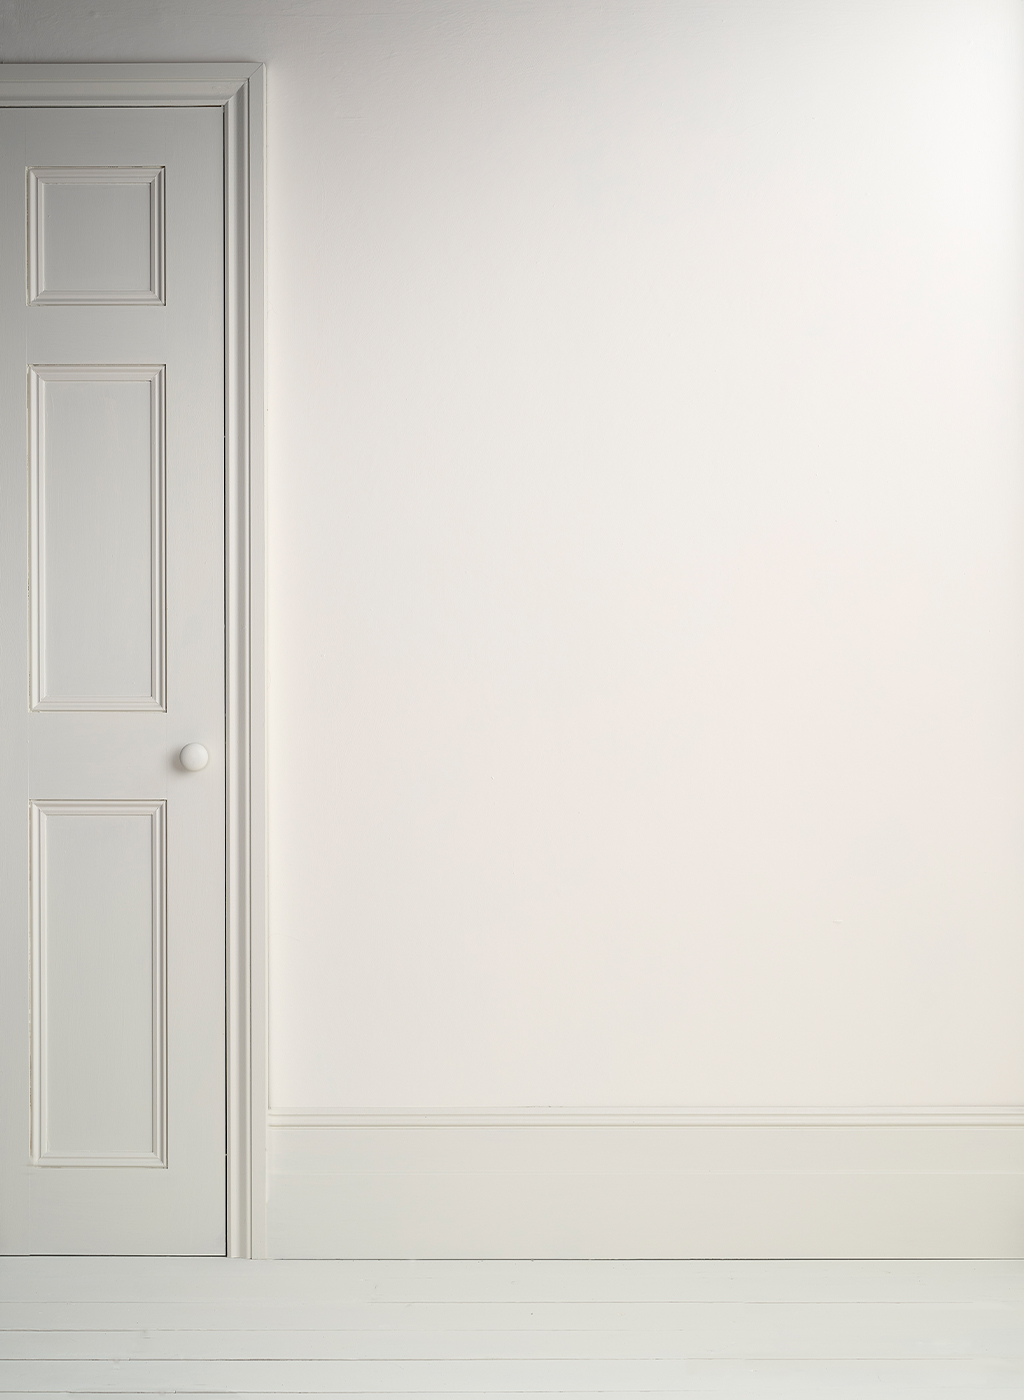 Lifestyle Image of Annie Sloan Satin Paint in Pure used on door and skirting